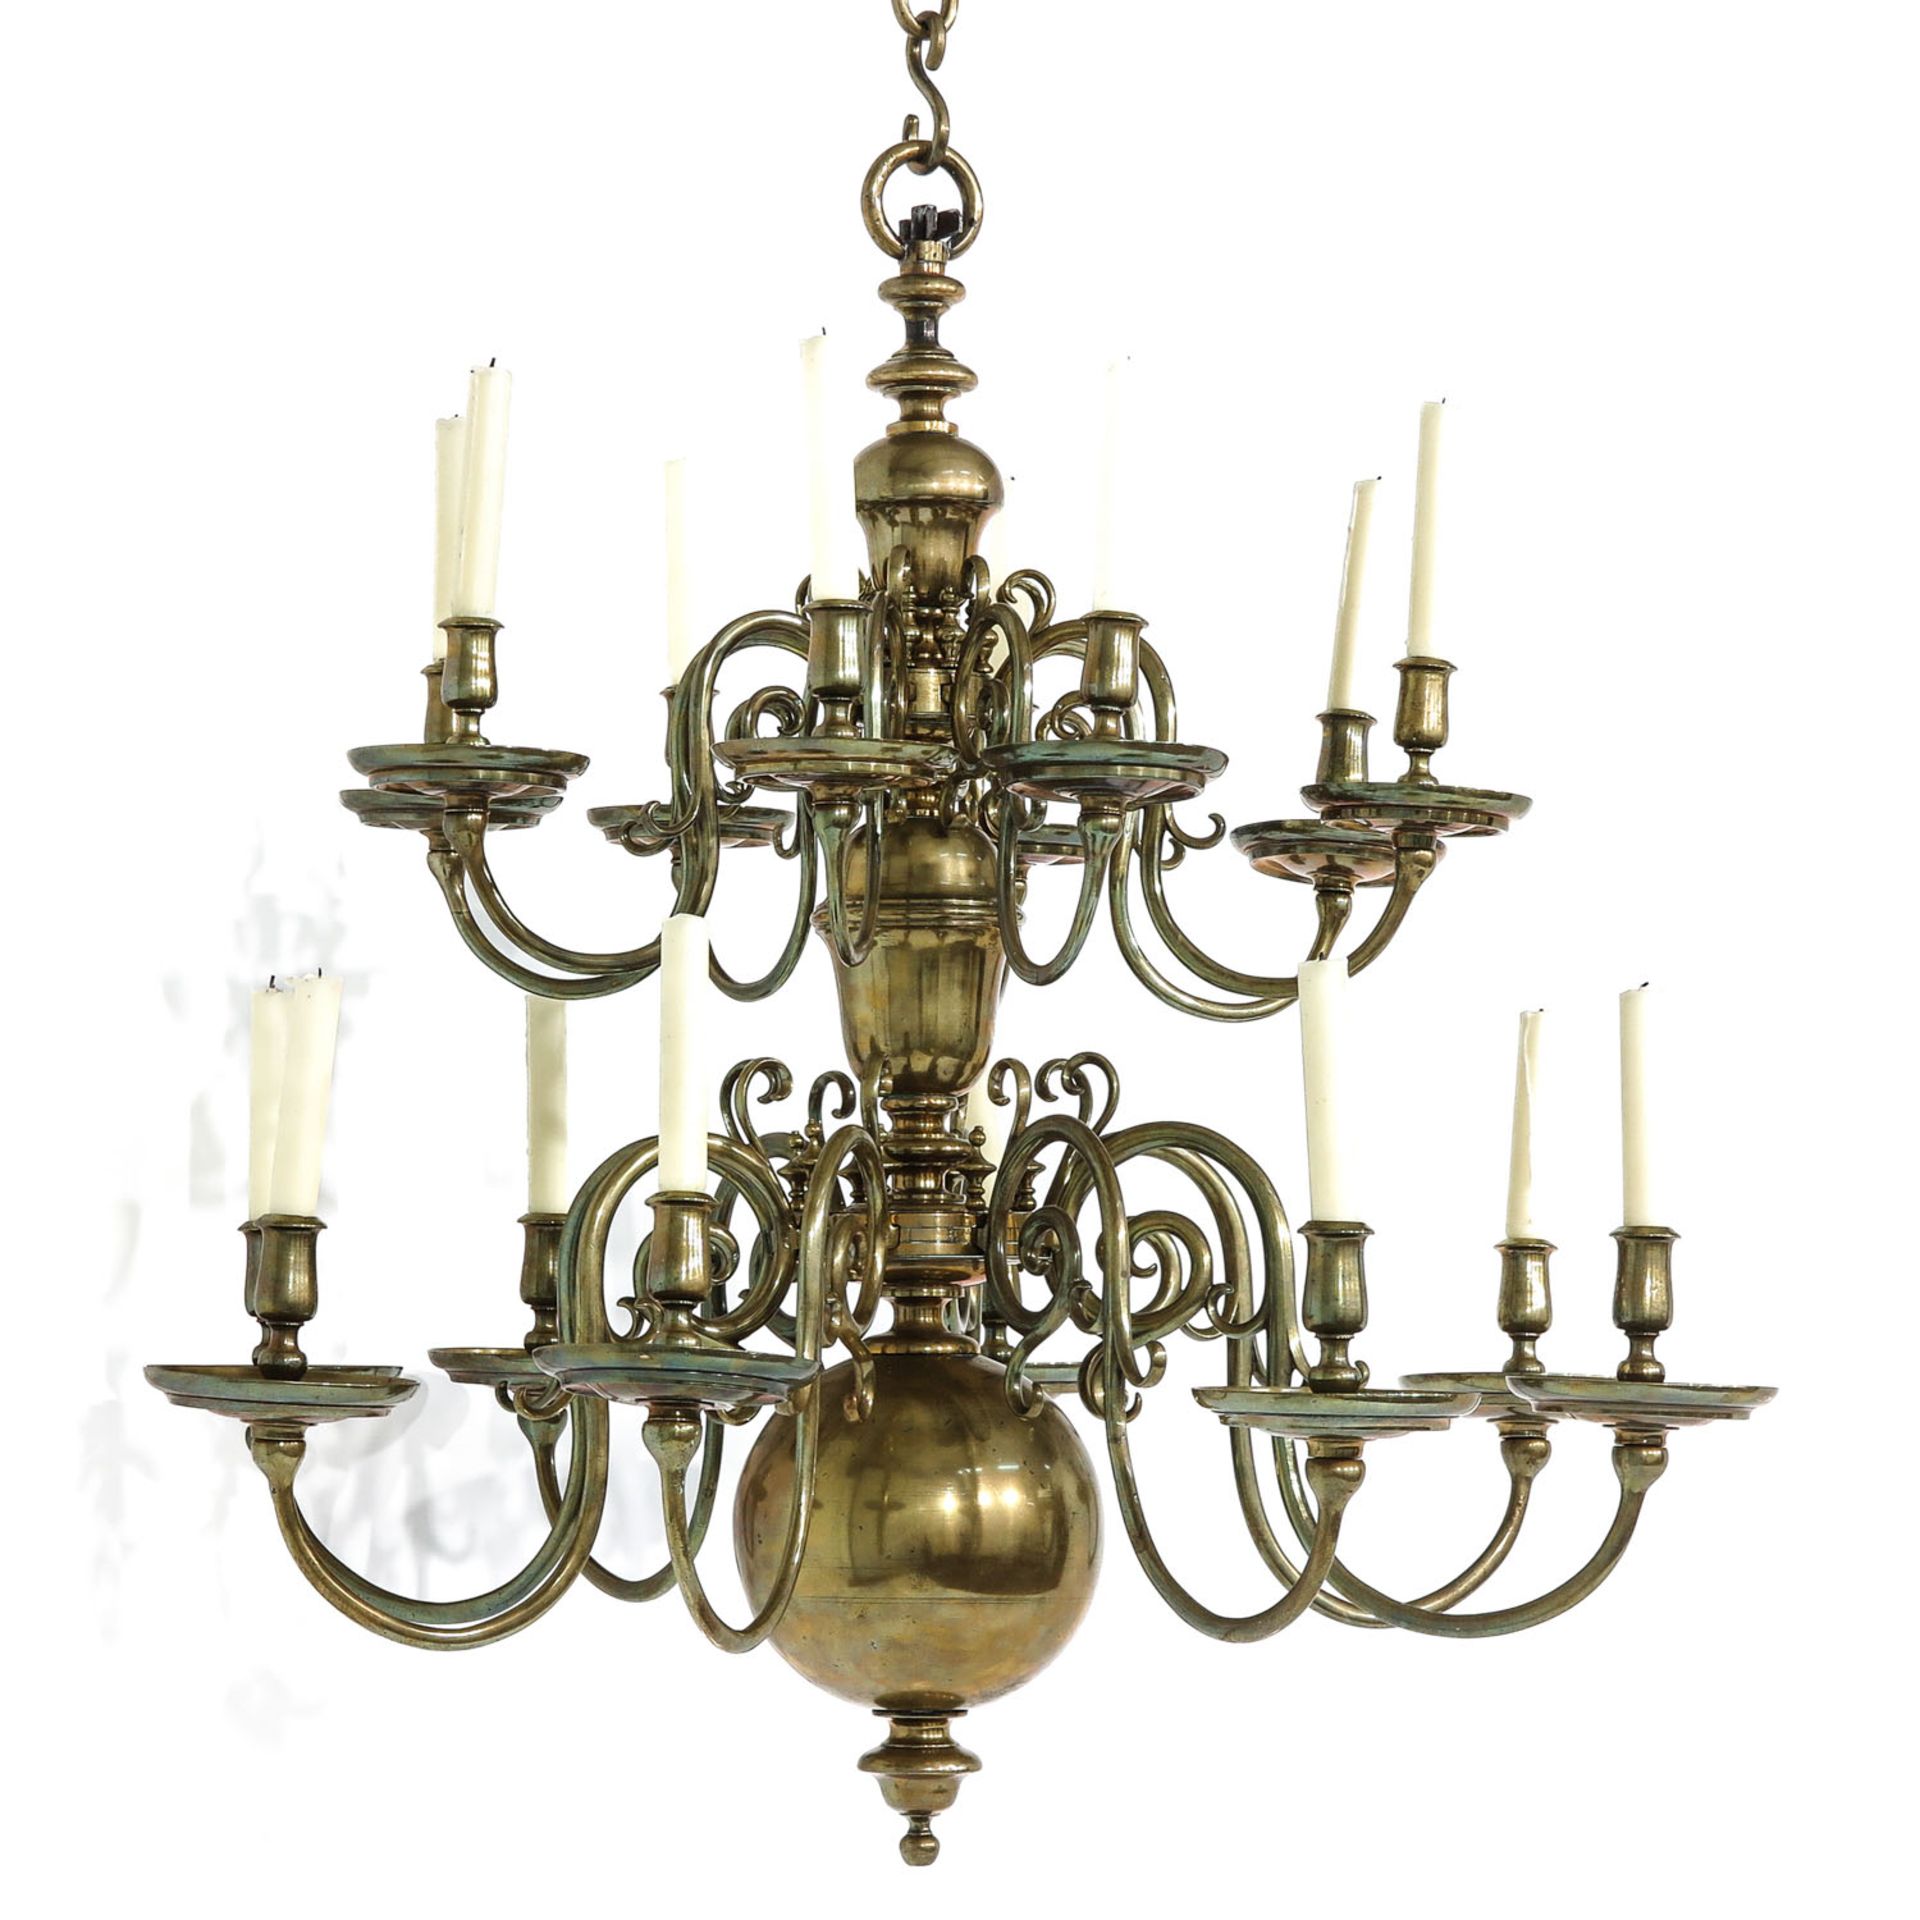 A Rare Example of a Renaissance Period Chandelier - Image 2 of 8